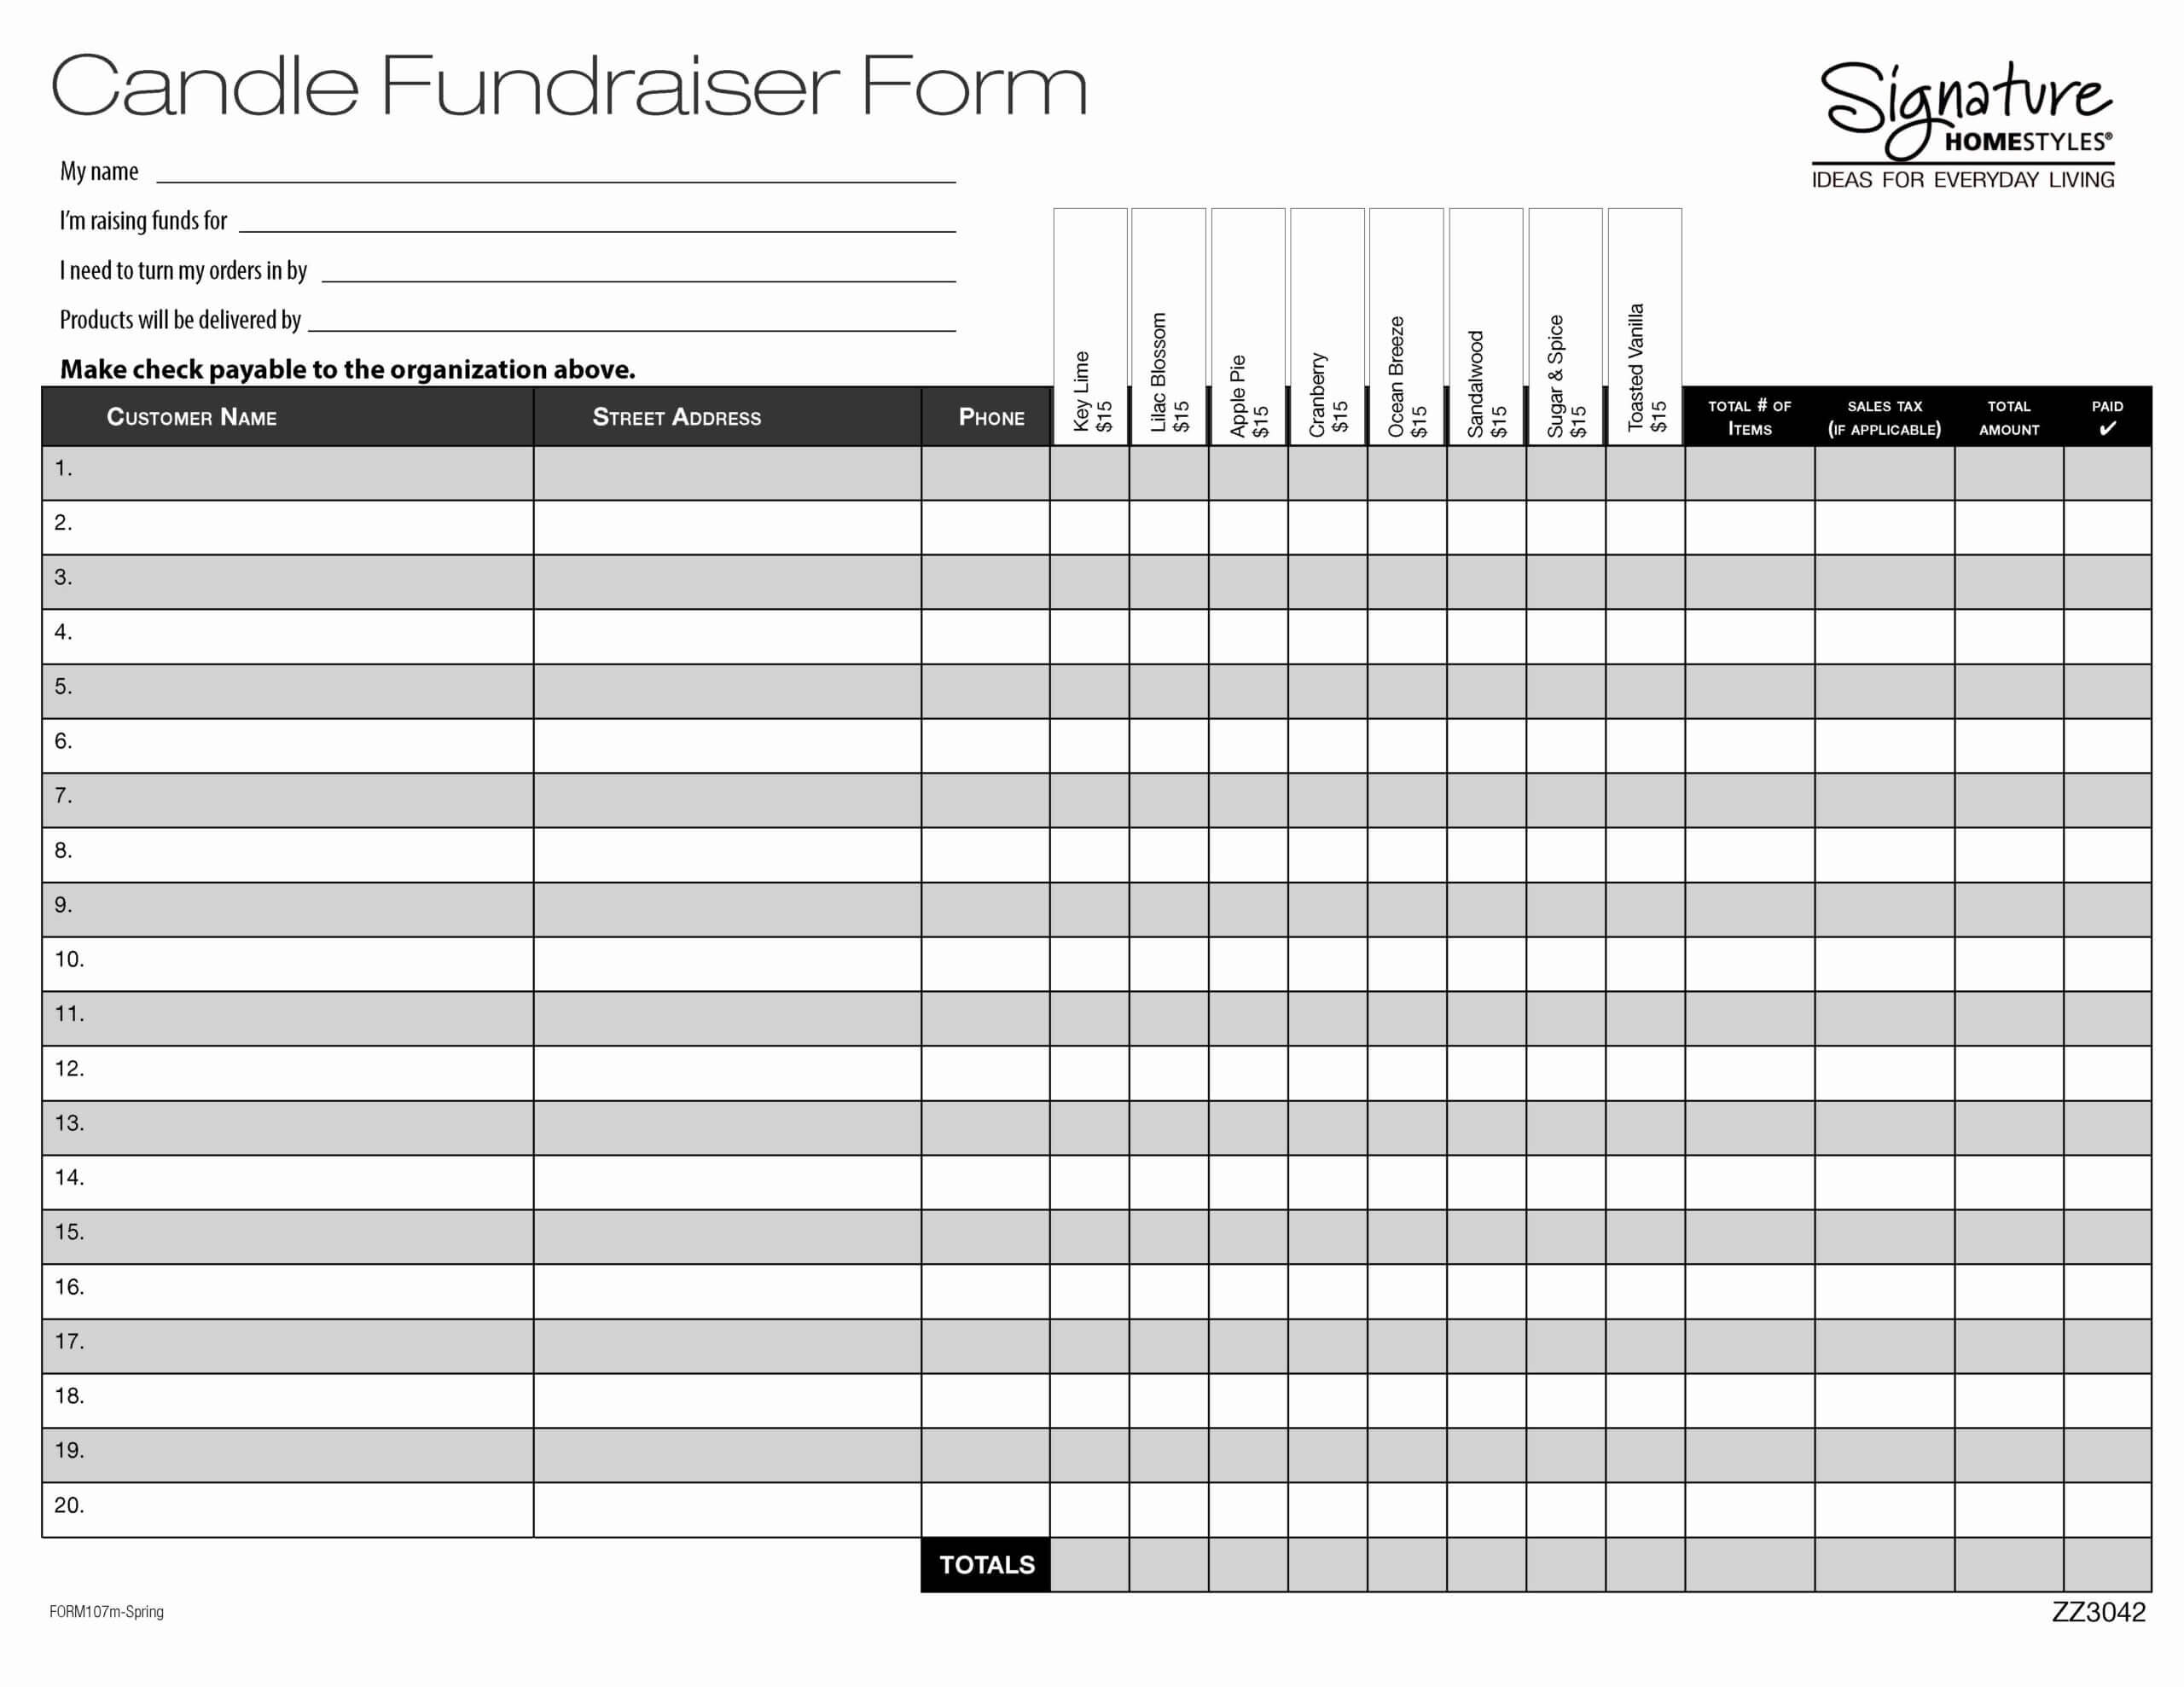 012 Template Ideas Fundraiser Order Form Excel Luxury Within Blank Fundraiser Order Form Template